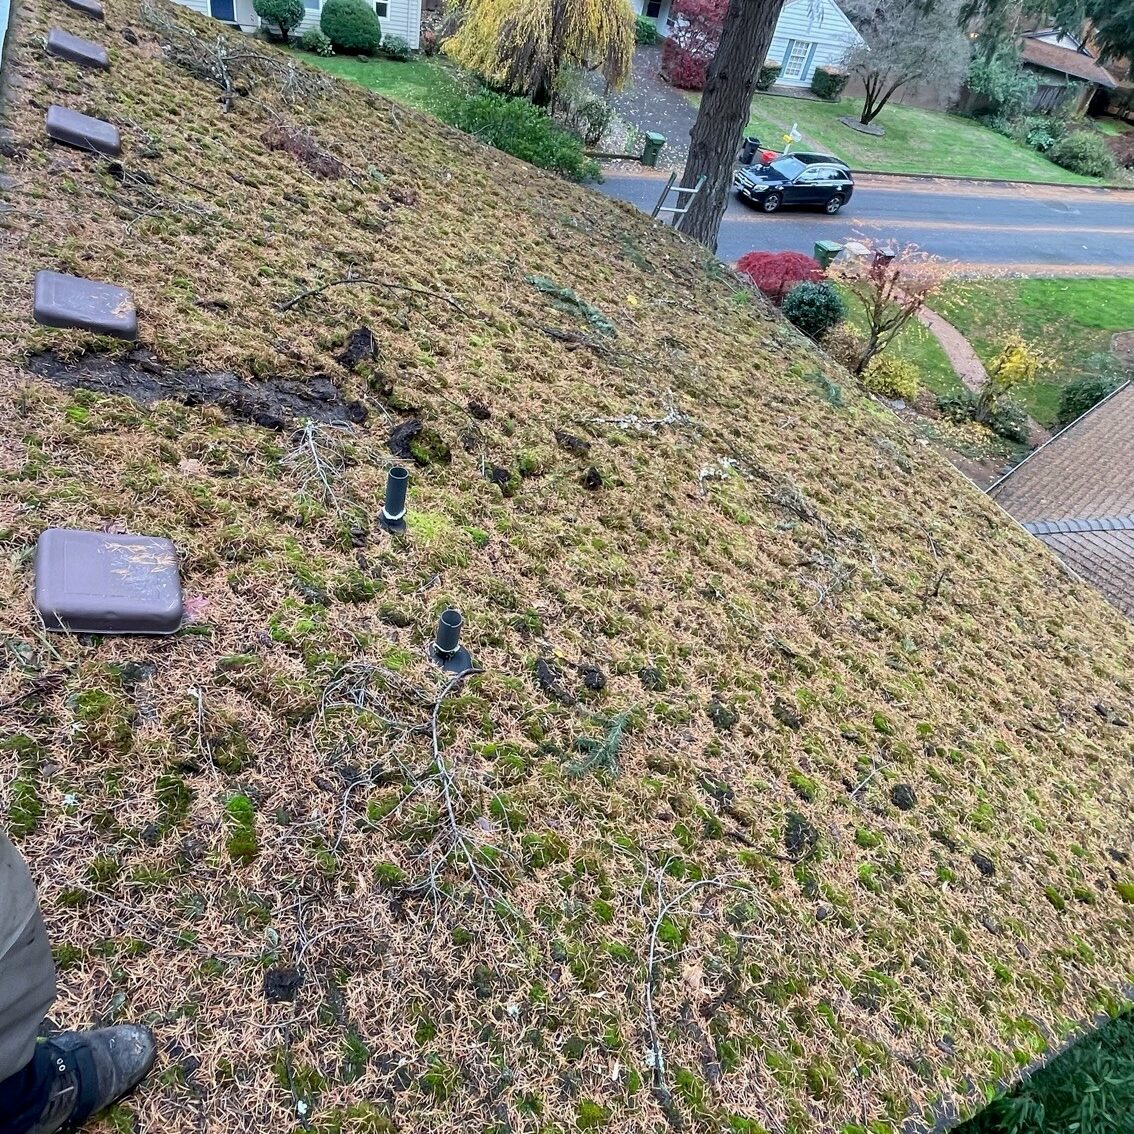 Overhead view of a sparsely vegetated green roof with scattered patches and objects, overlooking a suburban street.